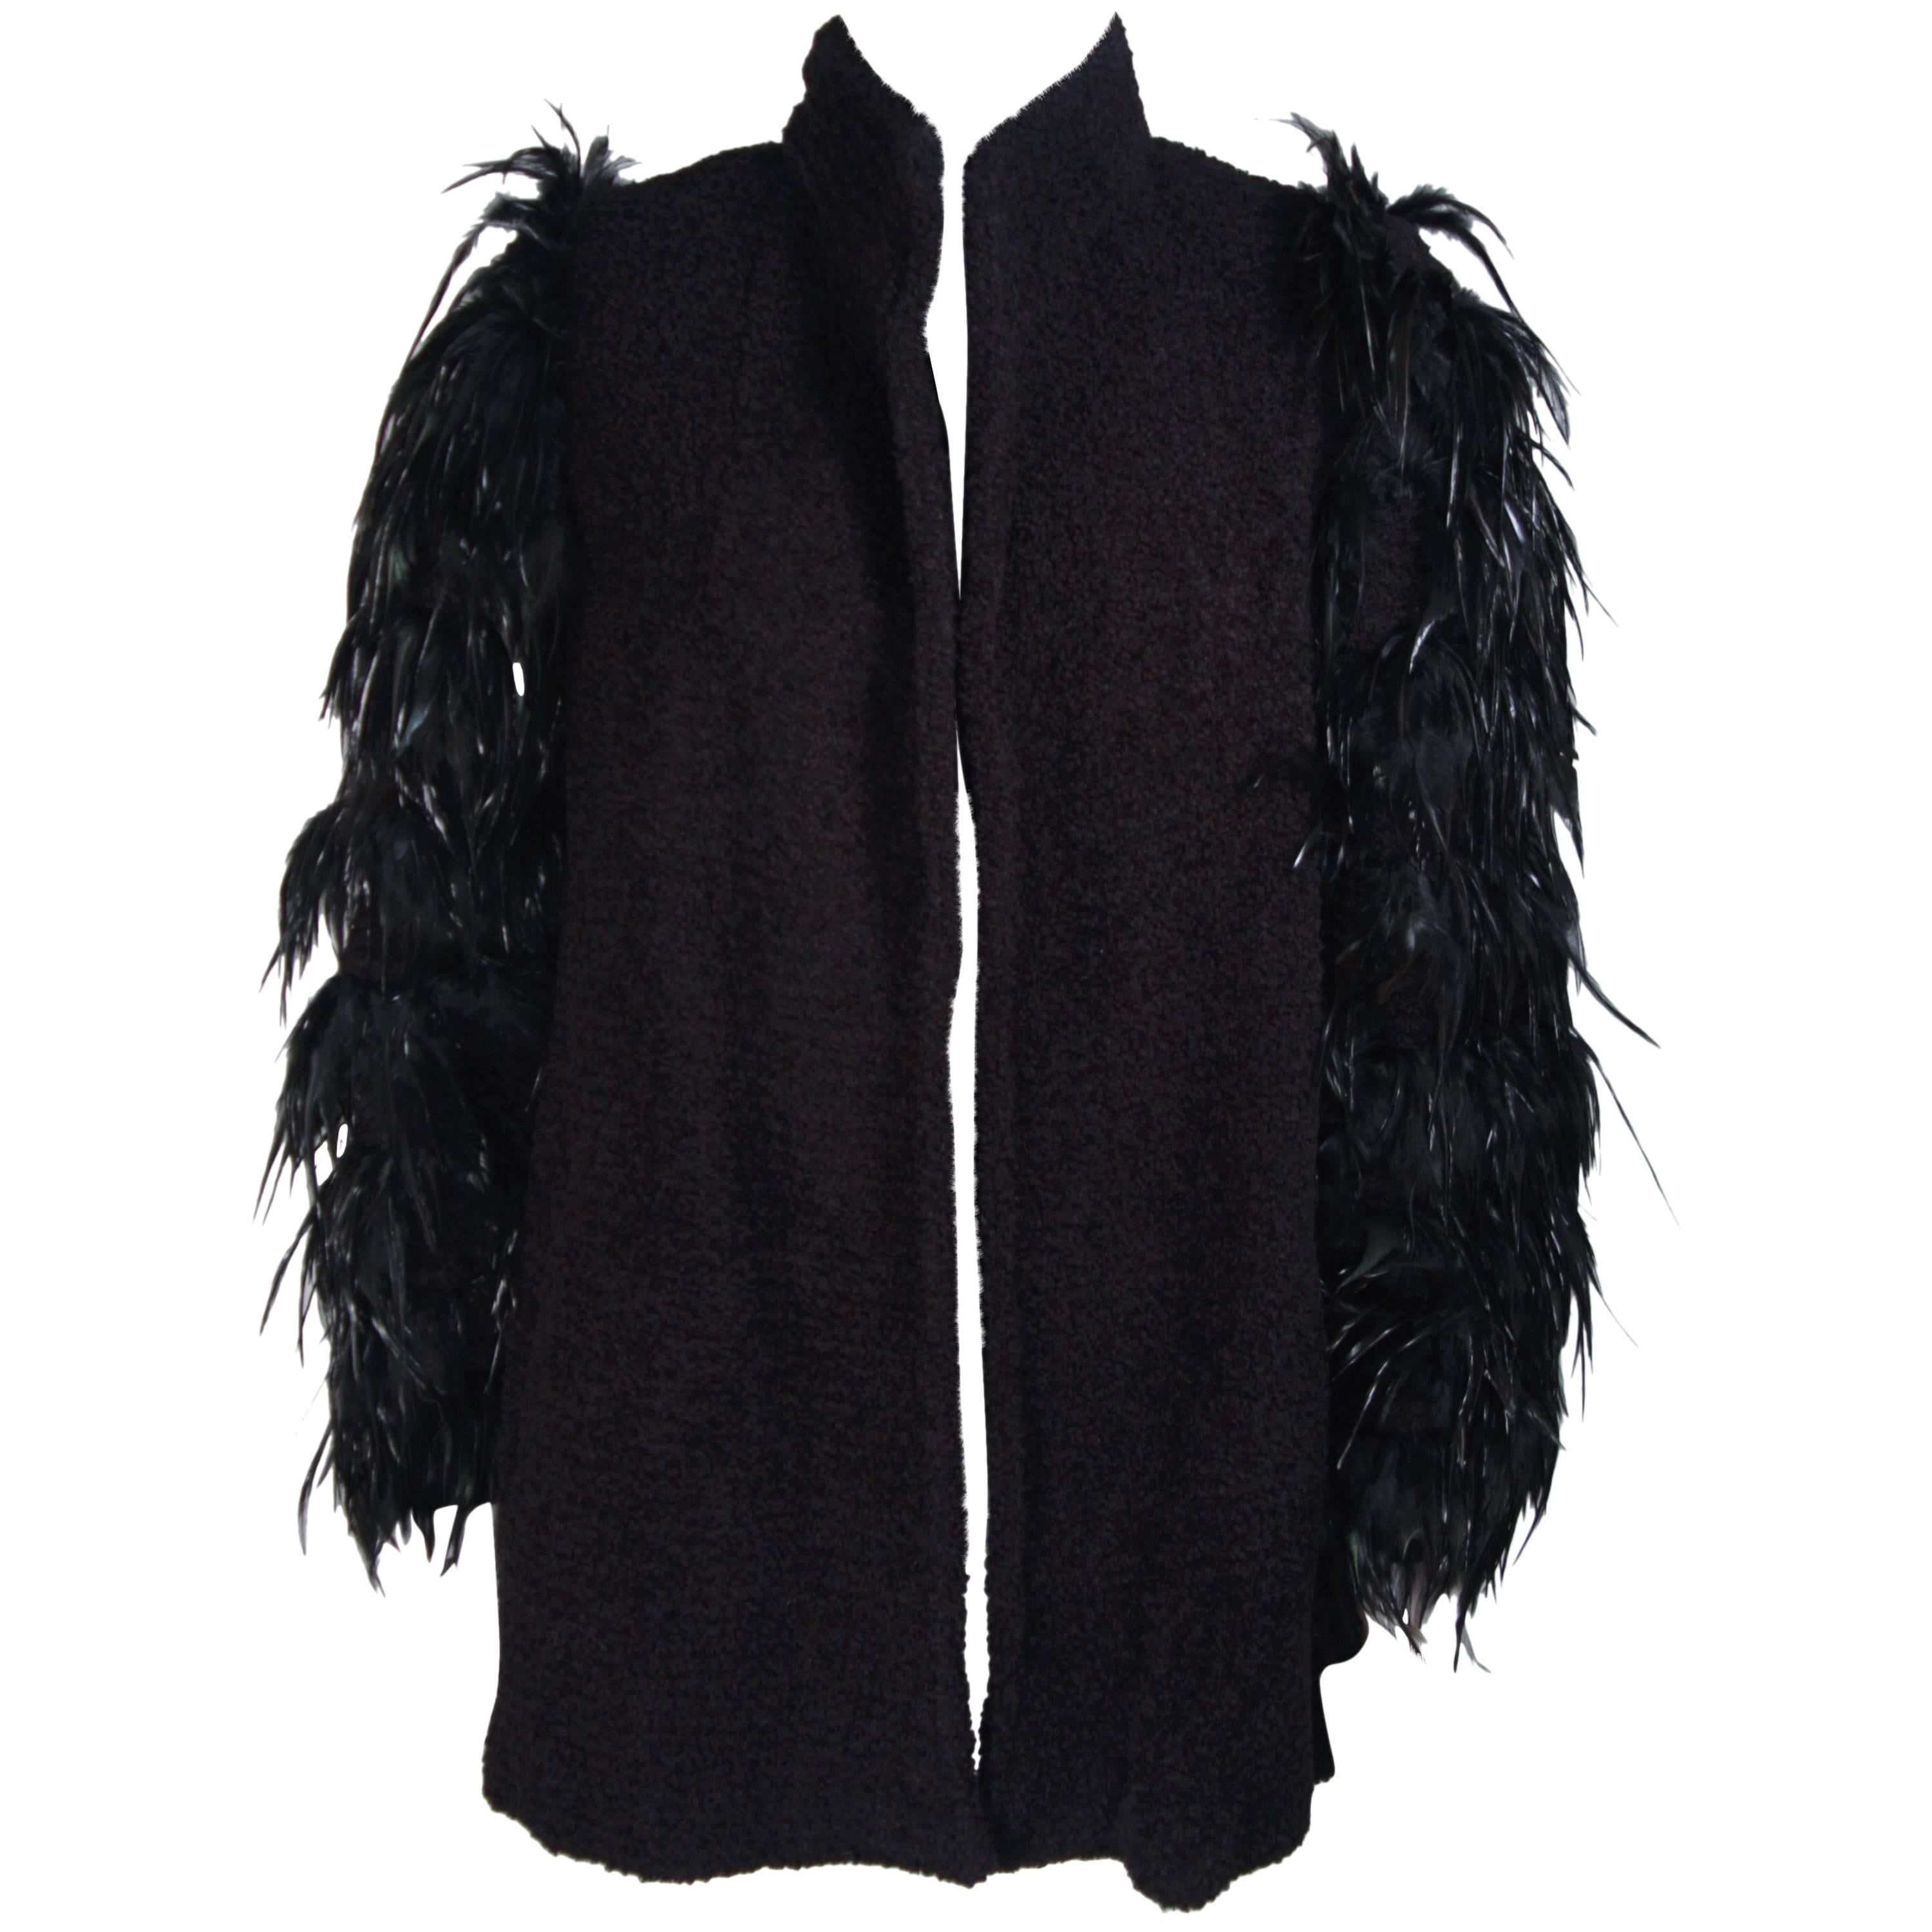 TED LAPIDUS Circa 1980's Lana Wool Jacket with Feather Sleeve Details